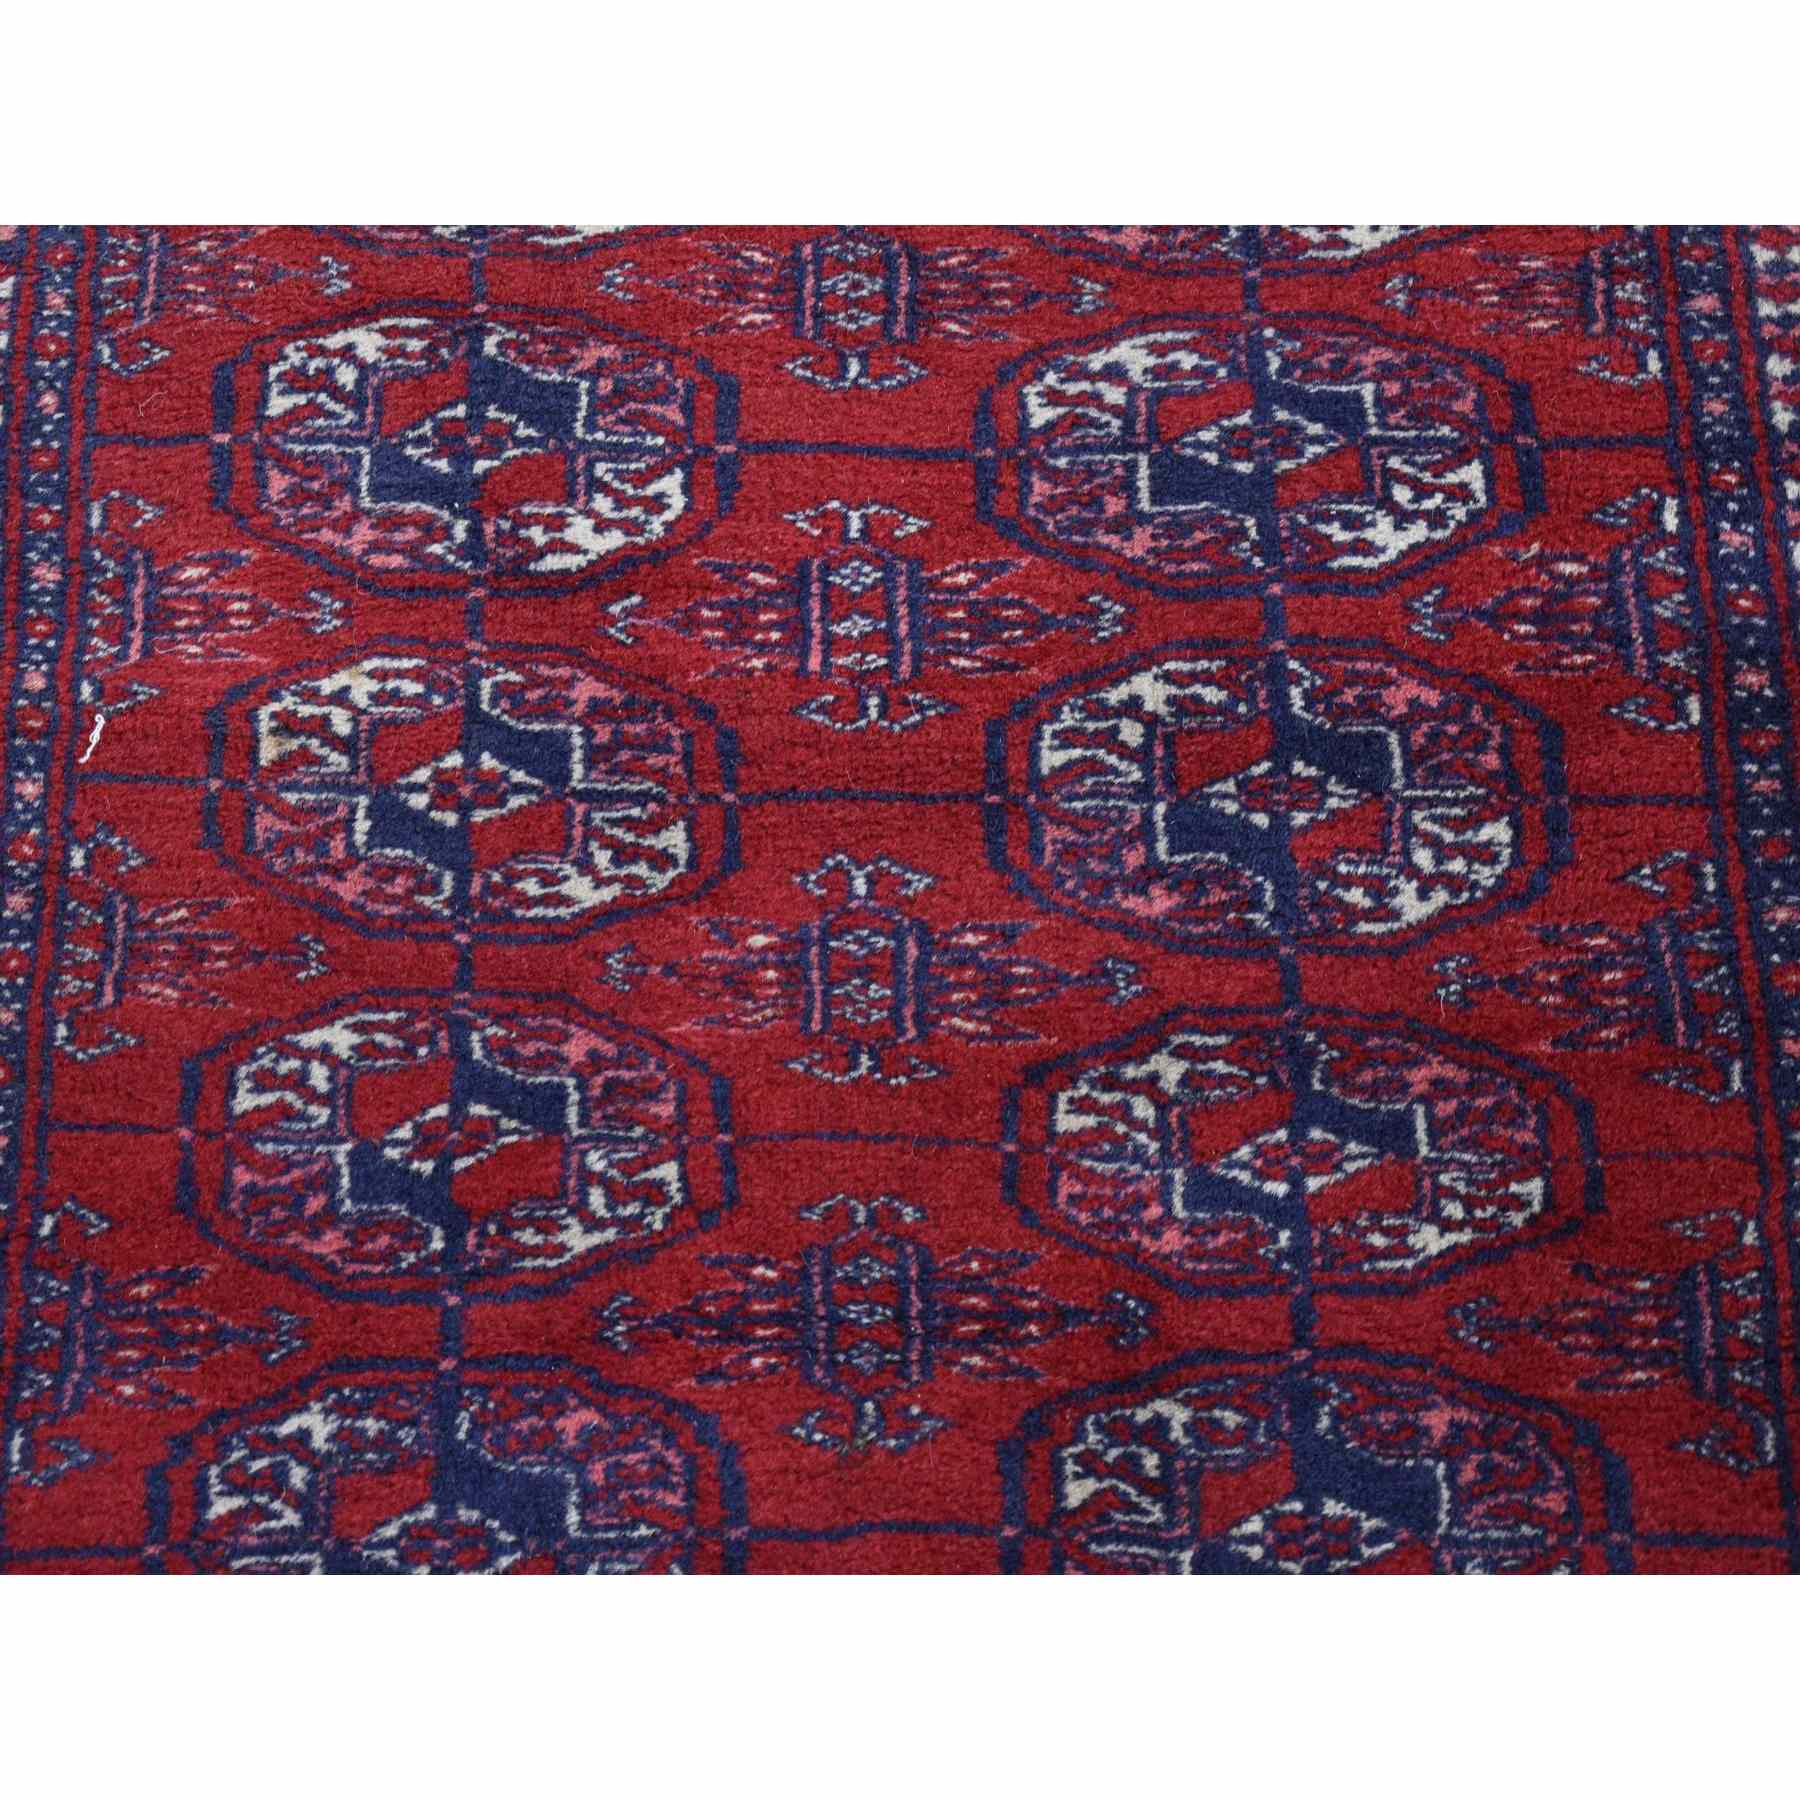 Antique-Hand-Knotted-Rug-403595